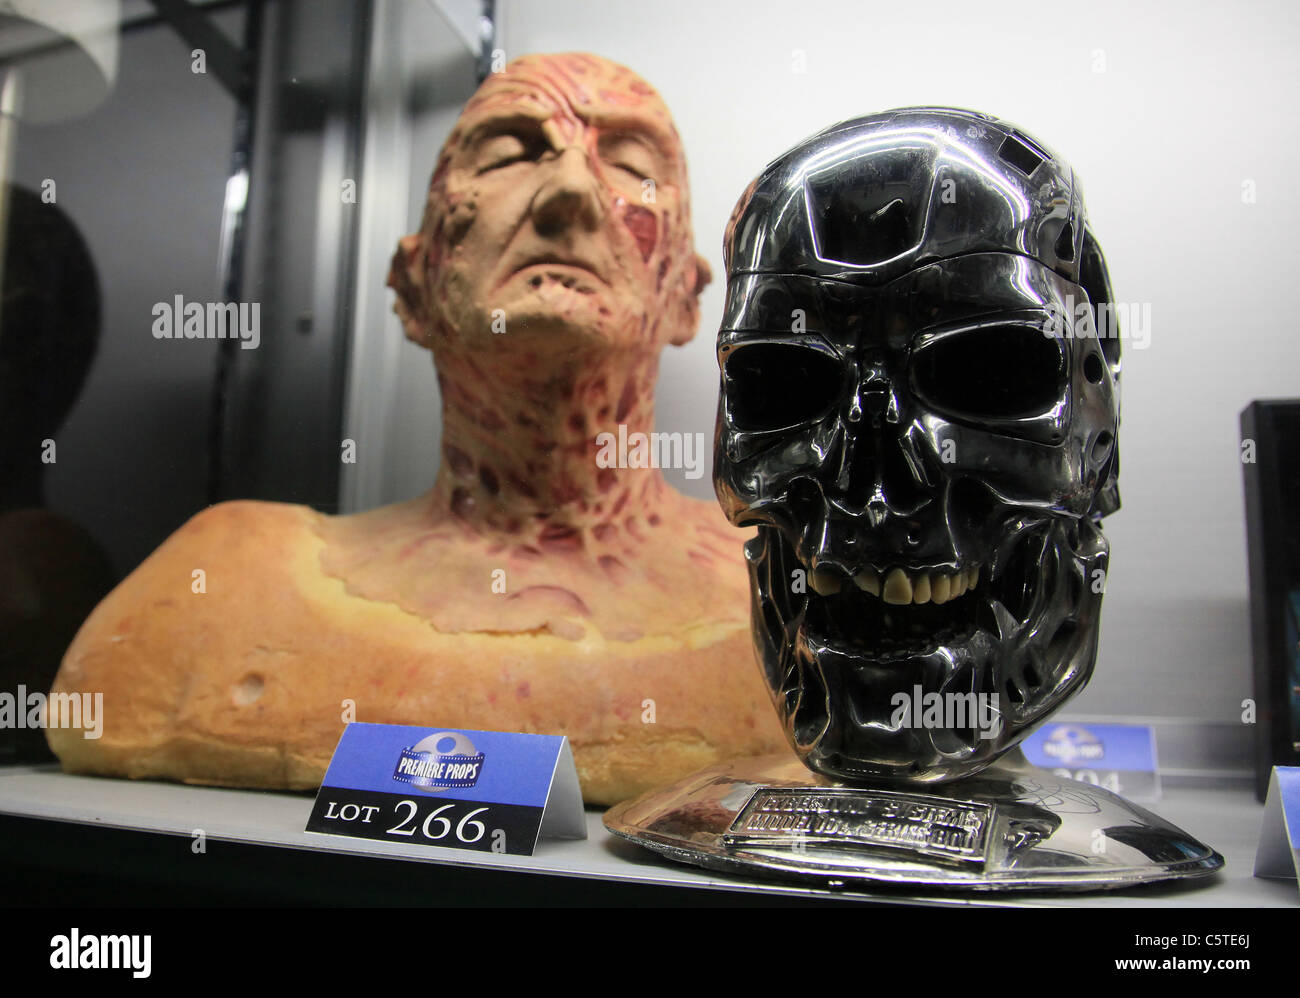 TERMINATOR SARAH CONNOR CHRONICLES SKULL PREMIERE PROPS PRESENTS HOLLYWOOD EXTRAVAGANZA 2 AUCTION LOS ANGELES CALIFORNIA USA 3 Stock Photo